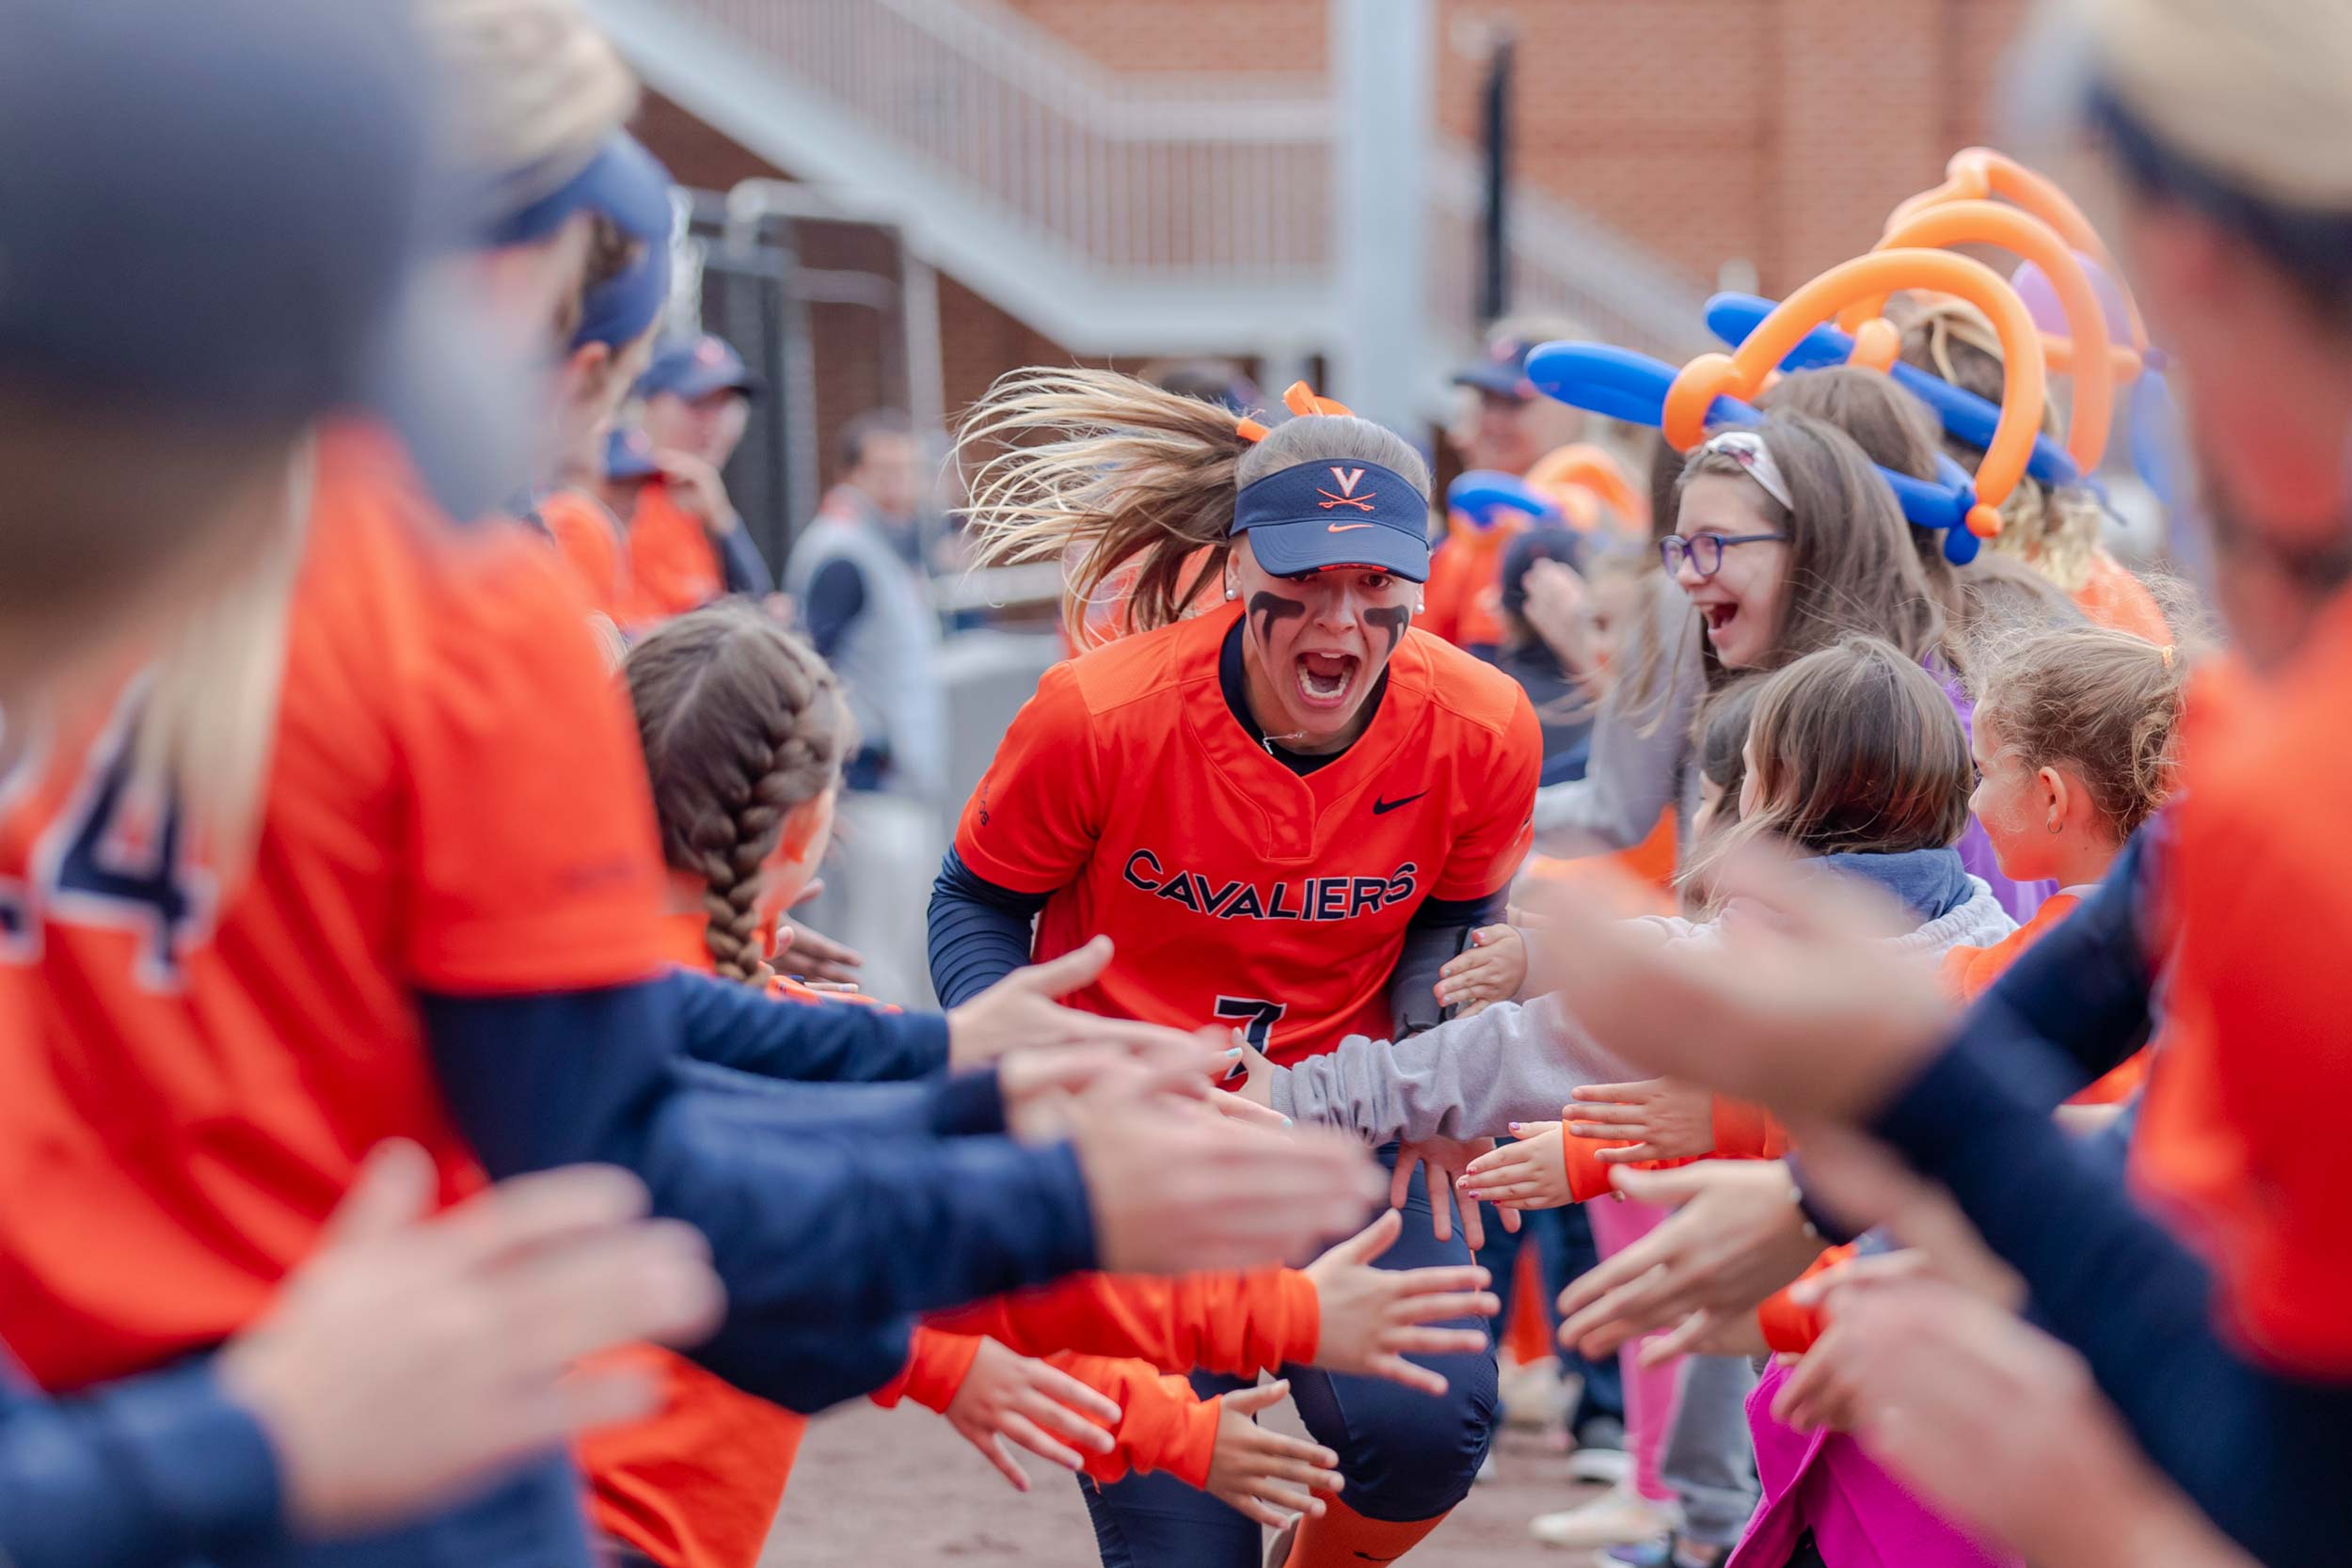 A uniformed UVA softball player runs through a high-five tunnel of young girls and teammates.